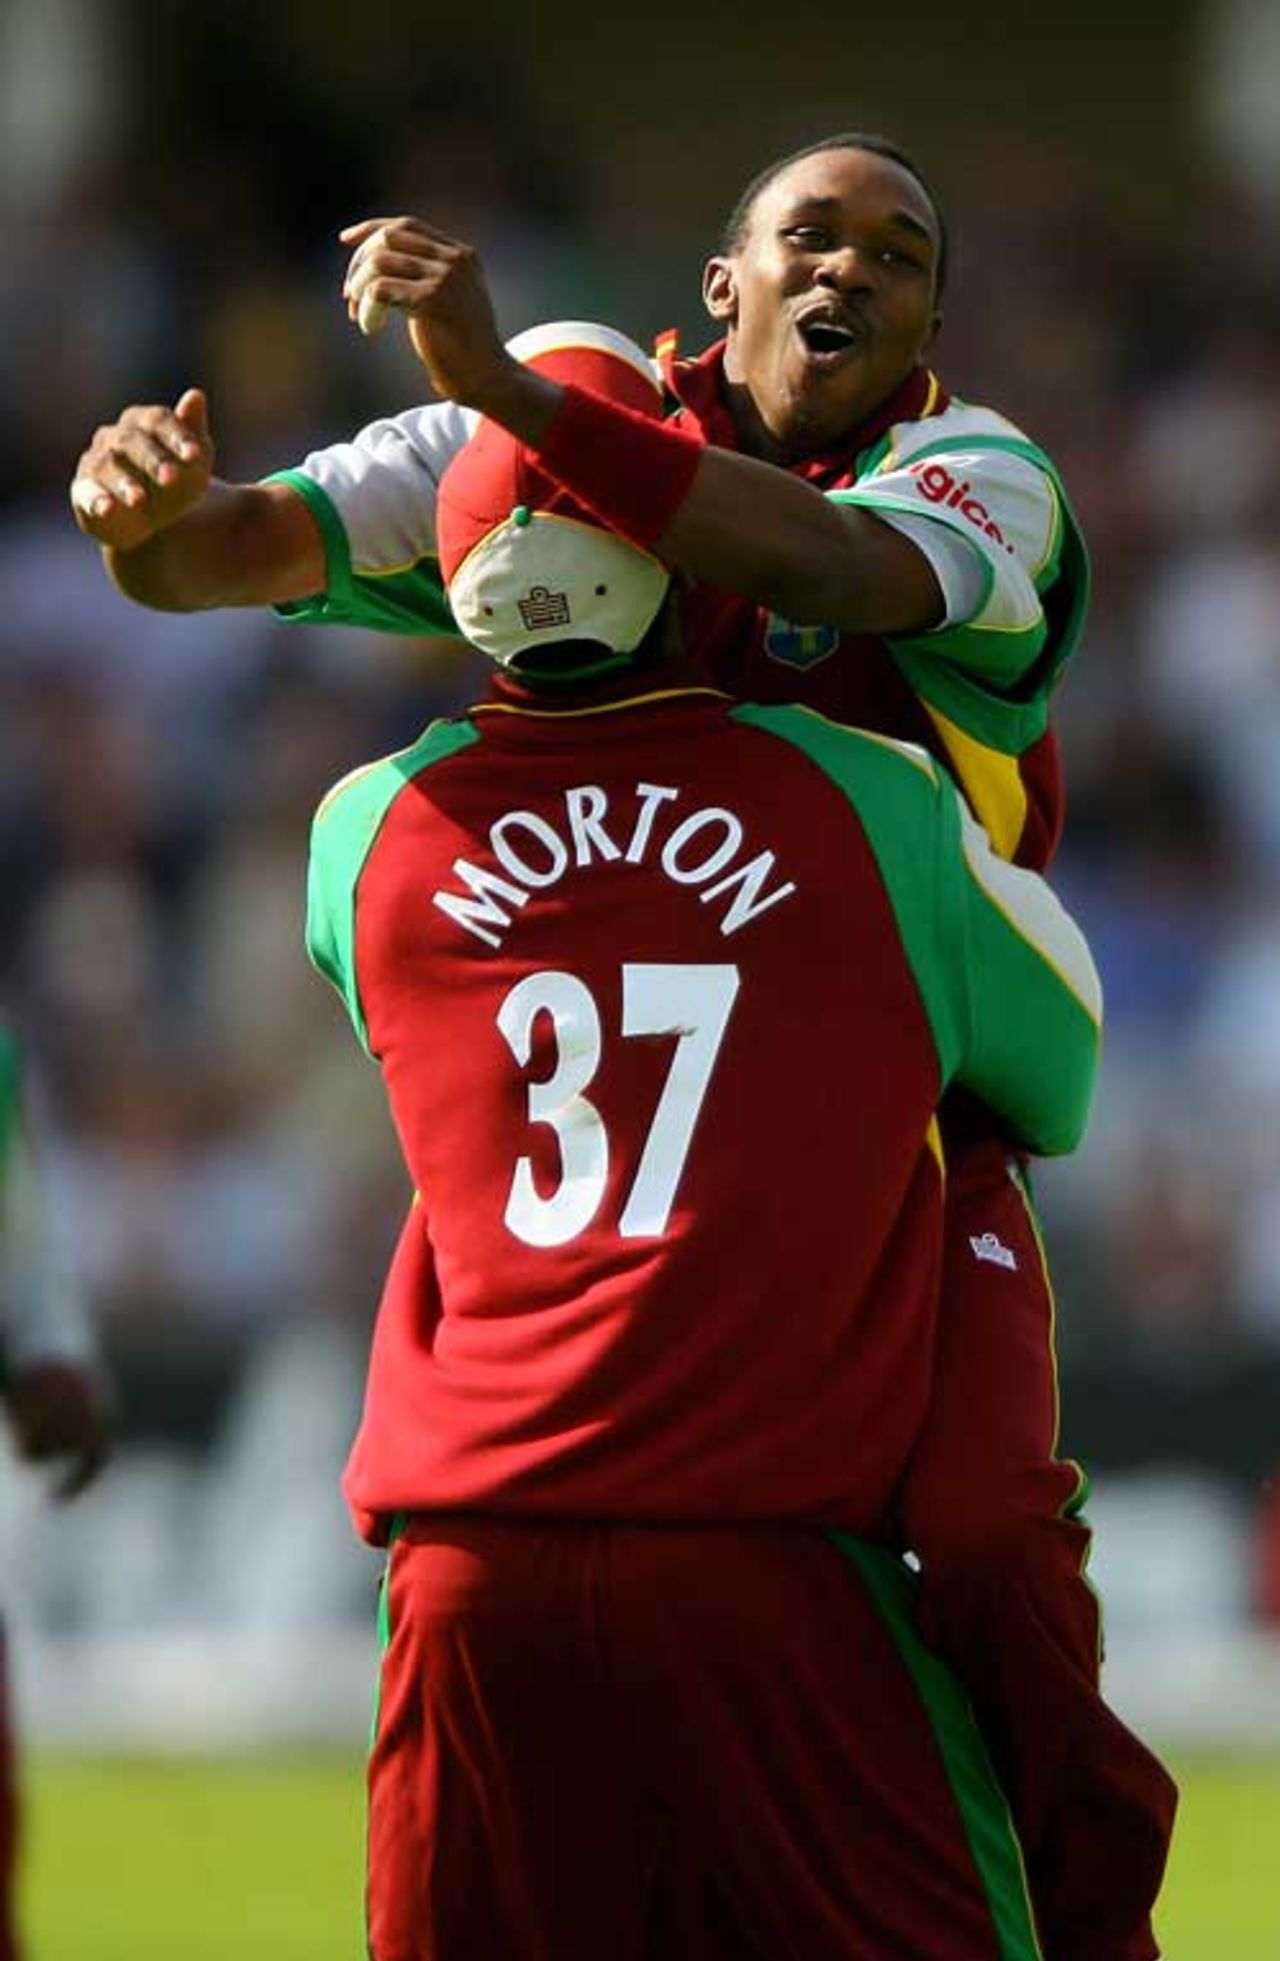 More celebrations for West Indies as they close in on the series, England v West Indies, 3rd ODI, Trent Bridge, July 7, 2007